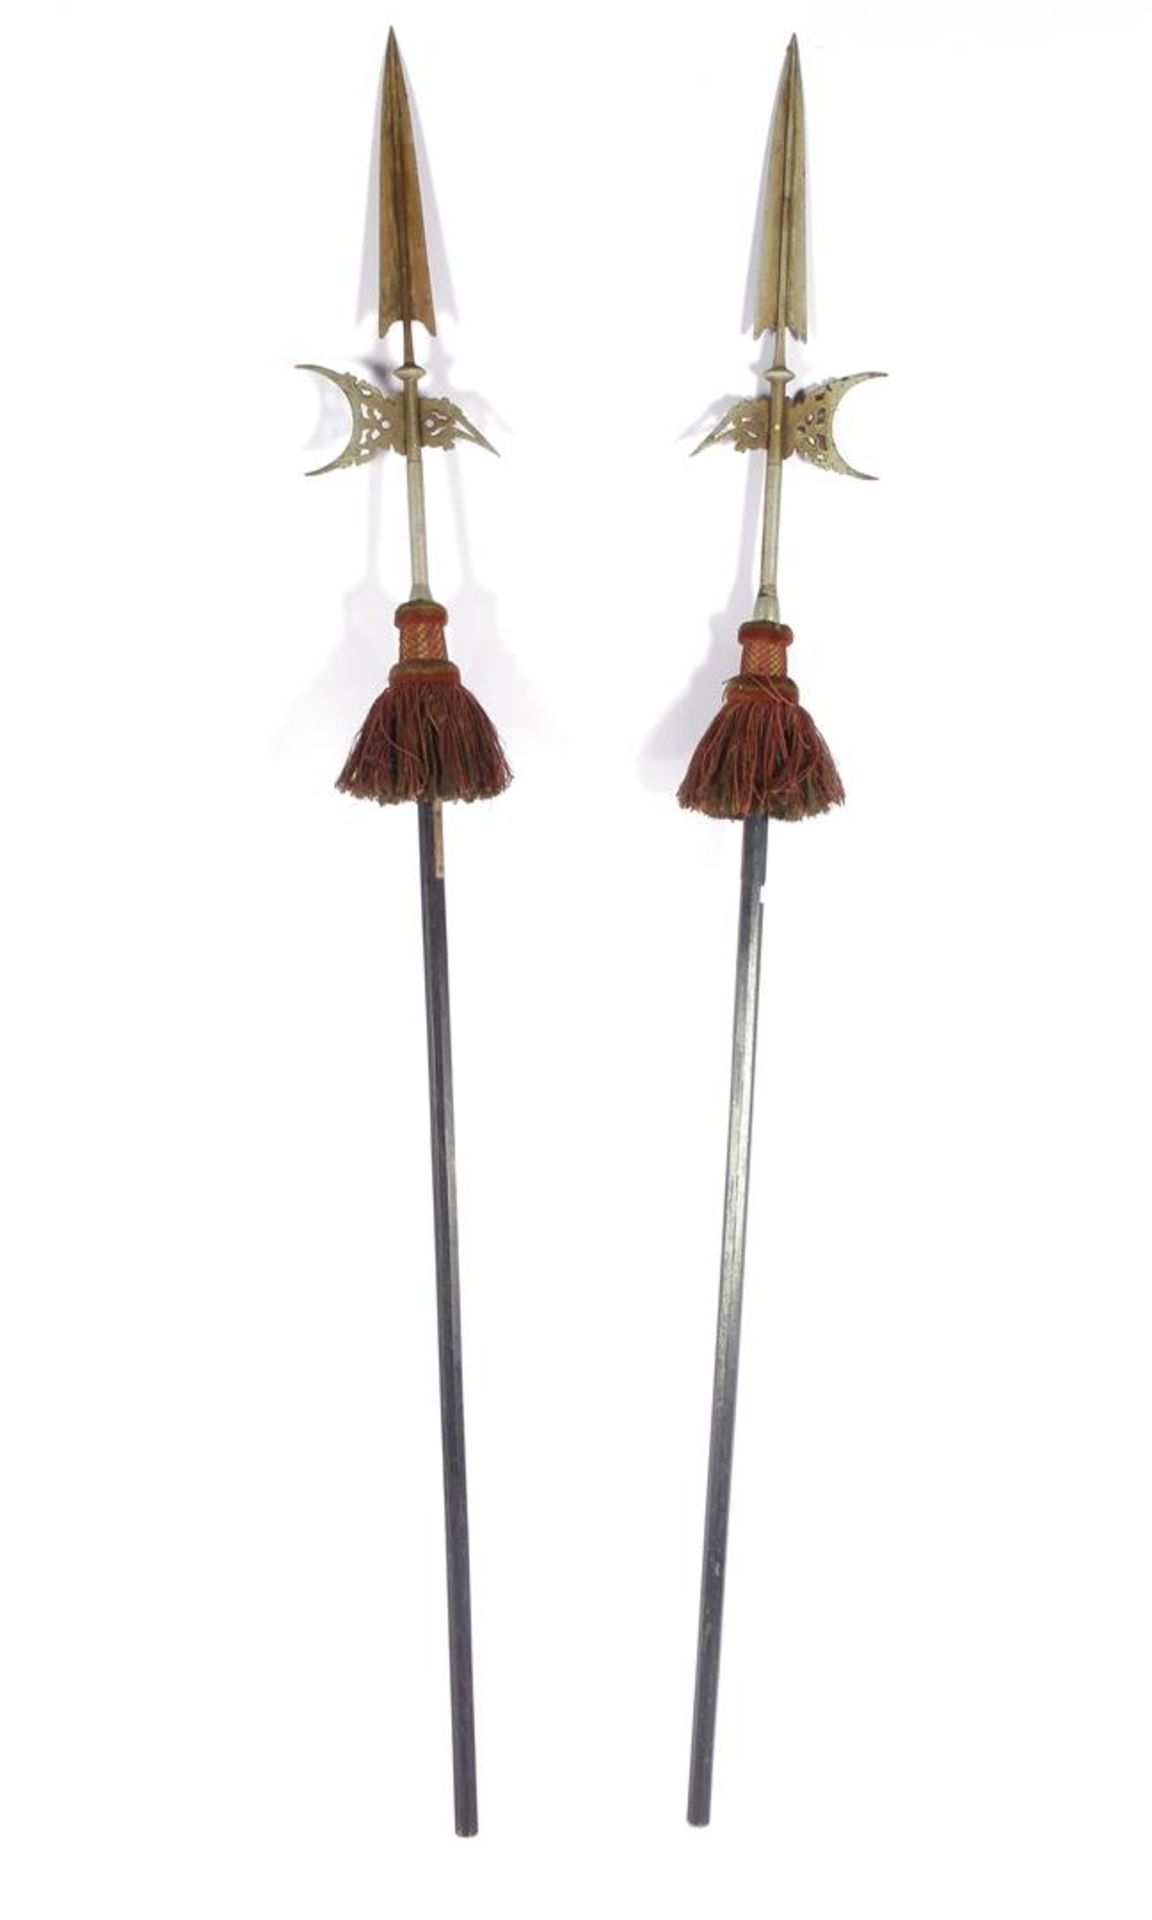 2 Halberds after Medieval example, made ca.1900, 268 cm high